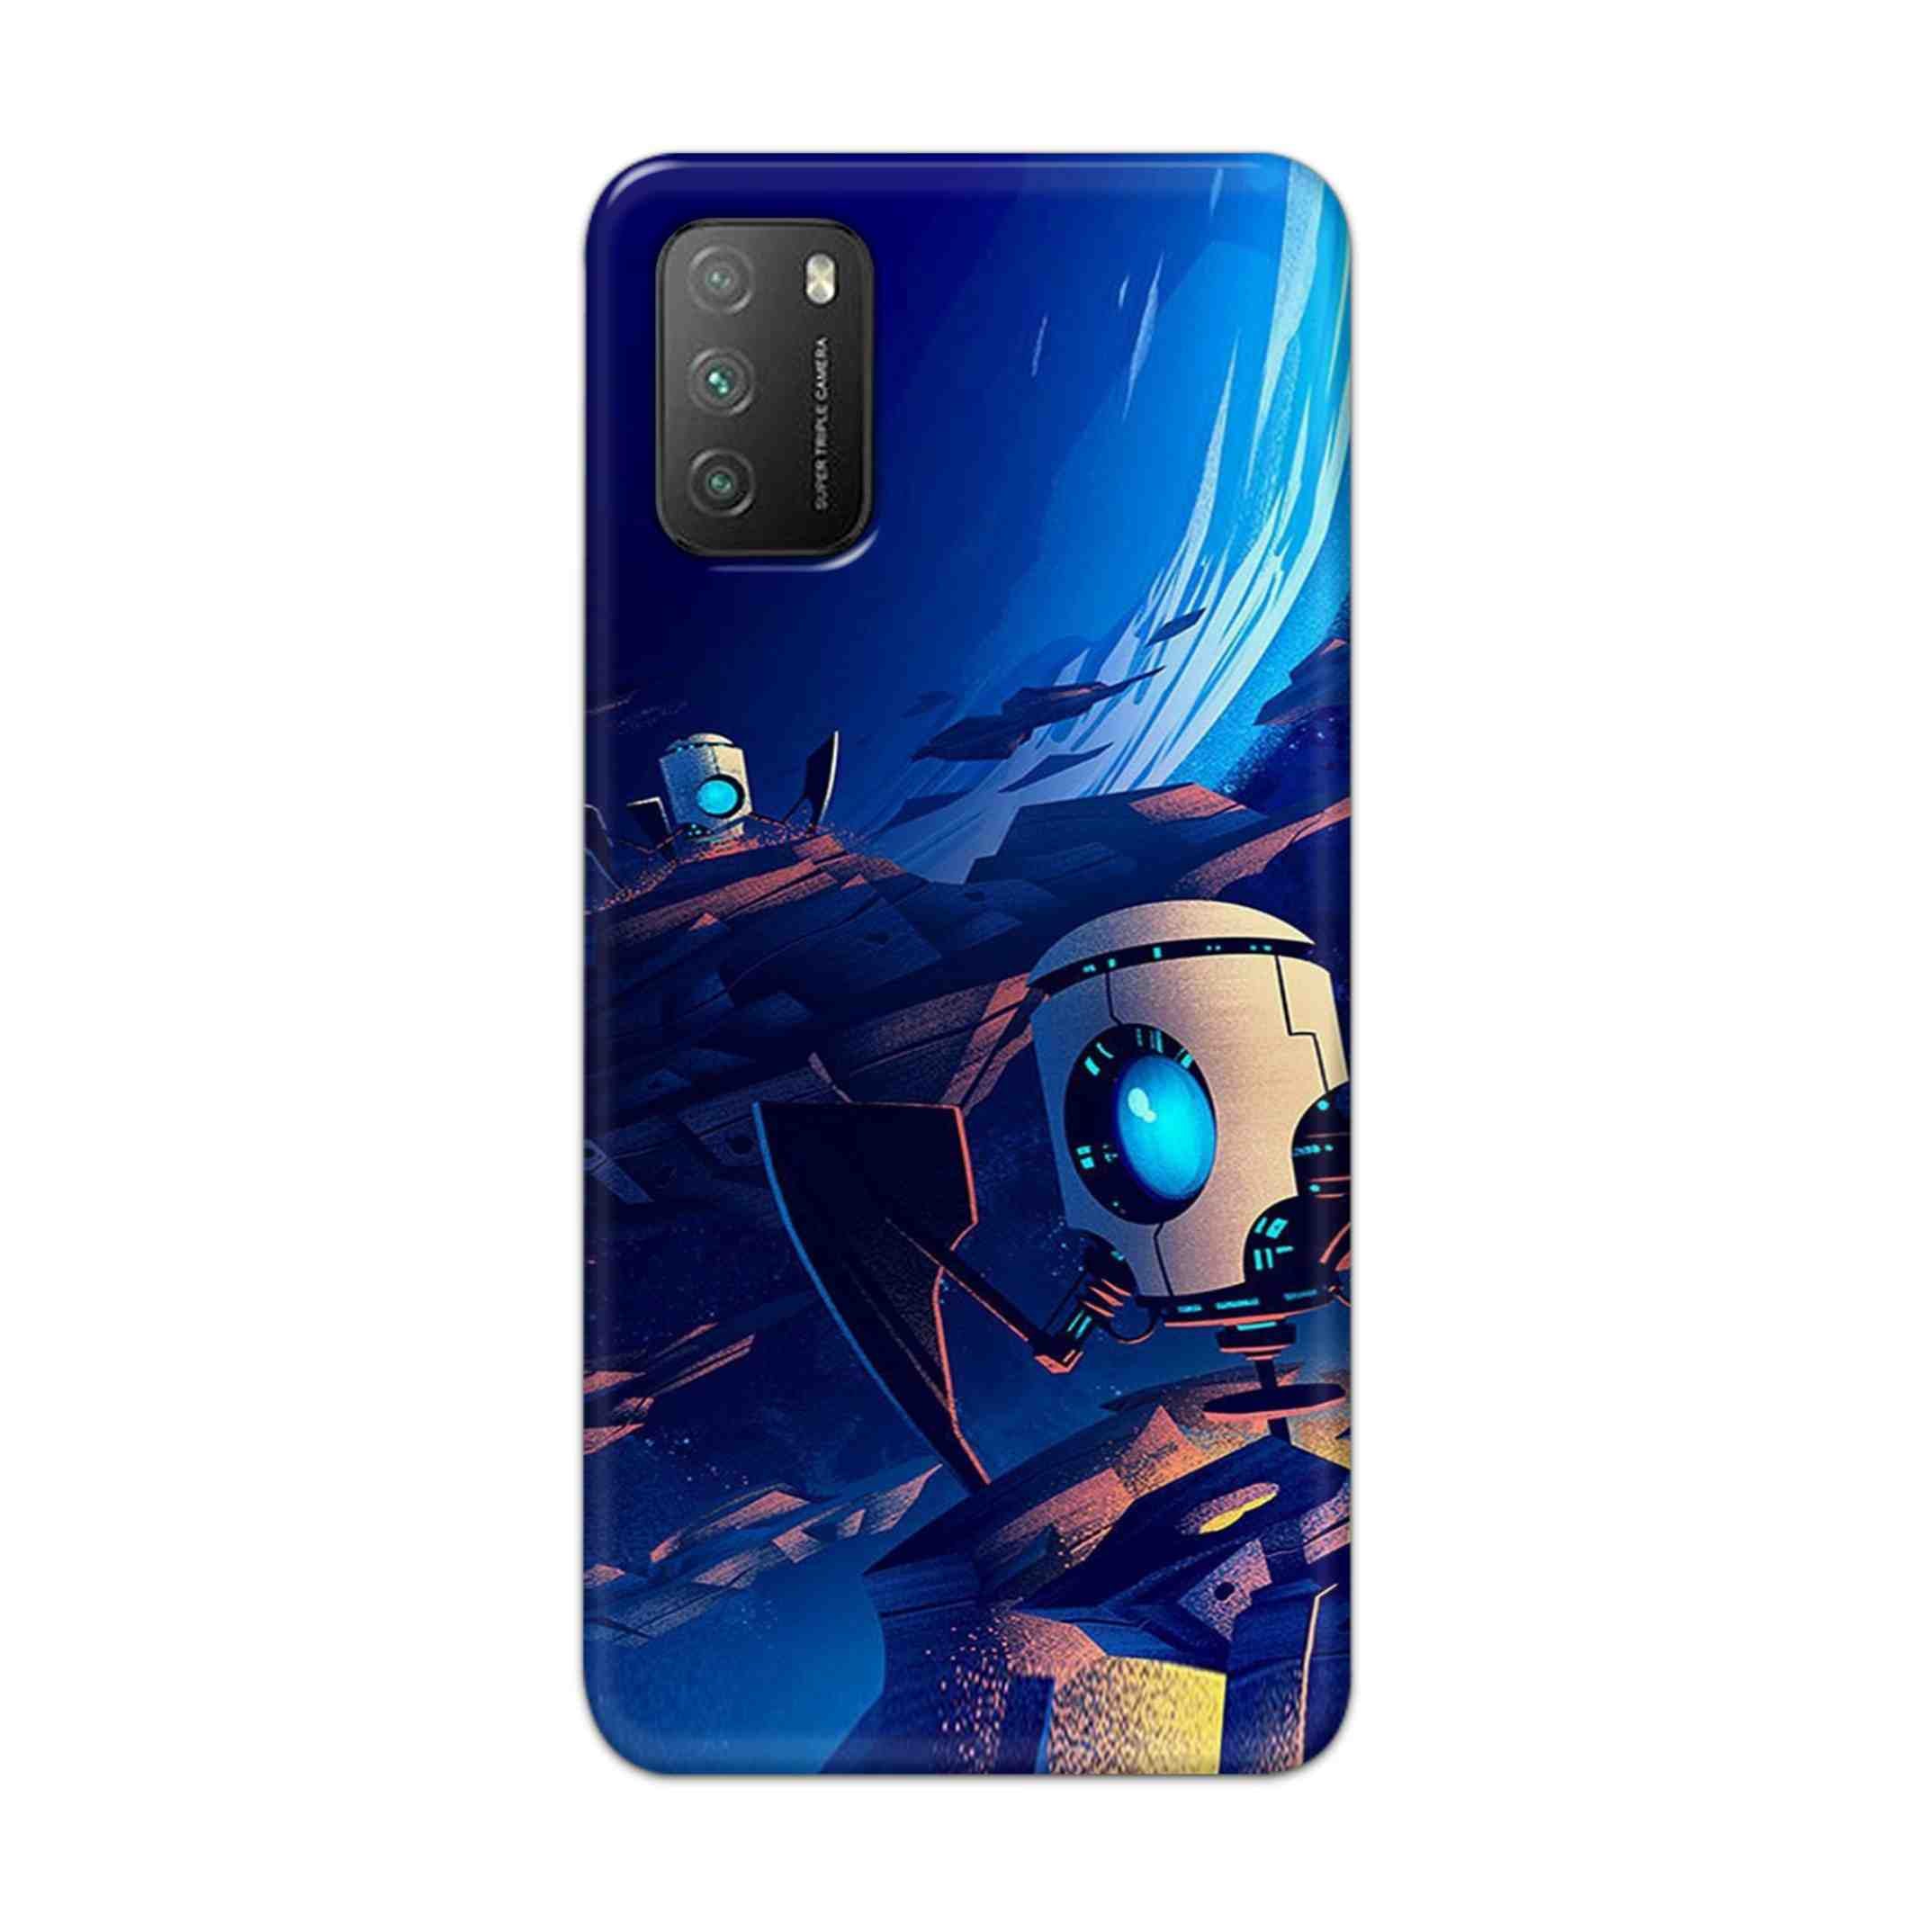 Buy Spaceship Robot Hard Back Mobile Phone Case Cover For Poco M3 Online